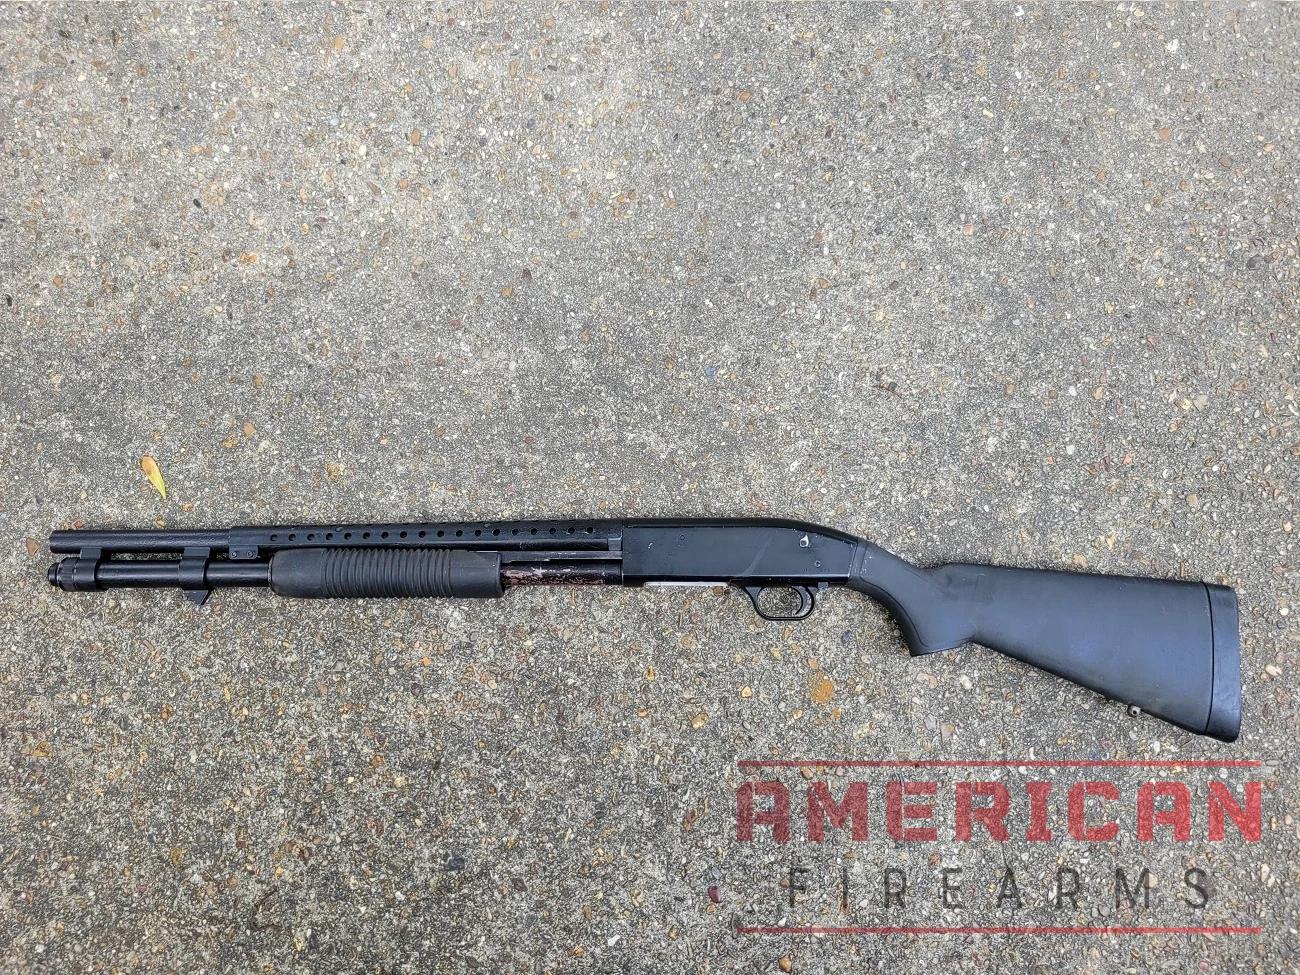 One of the best tactical shotguns ever made, the Mossberg 590 has stood the test of time